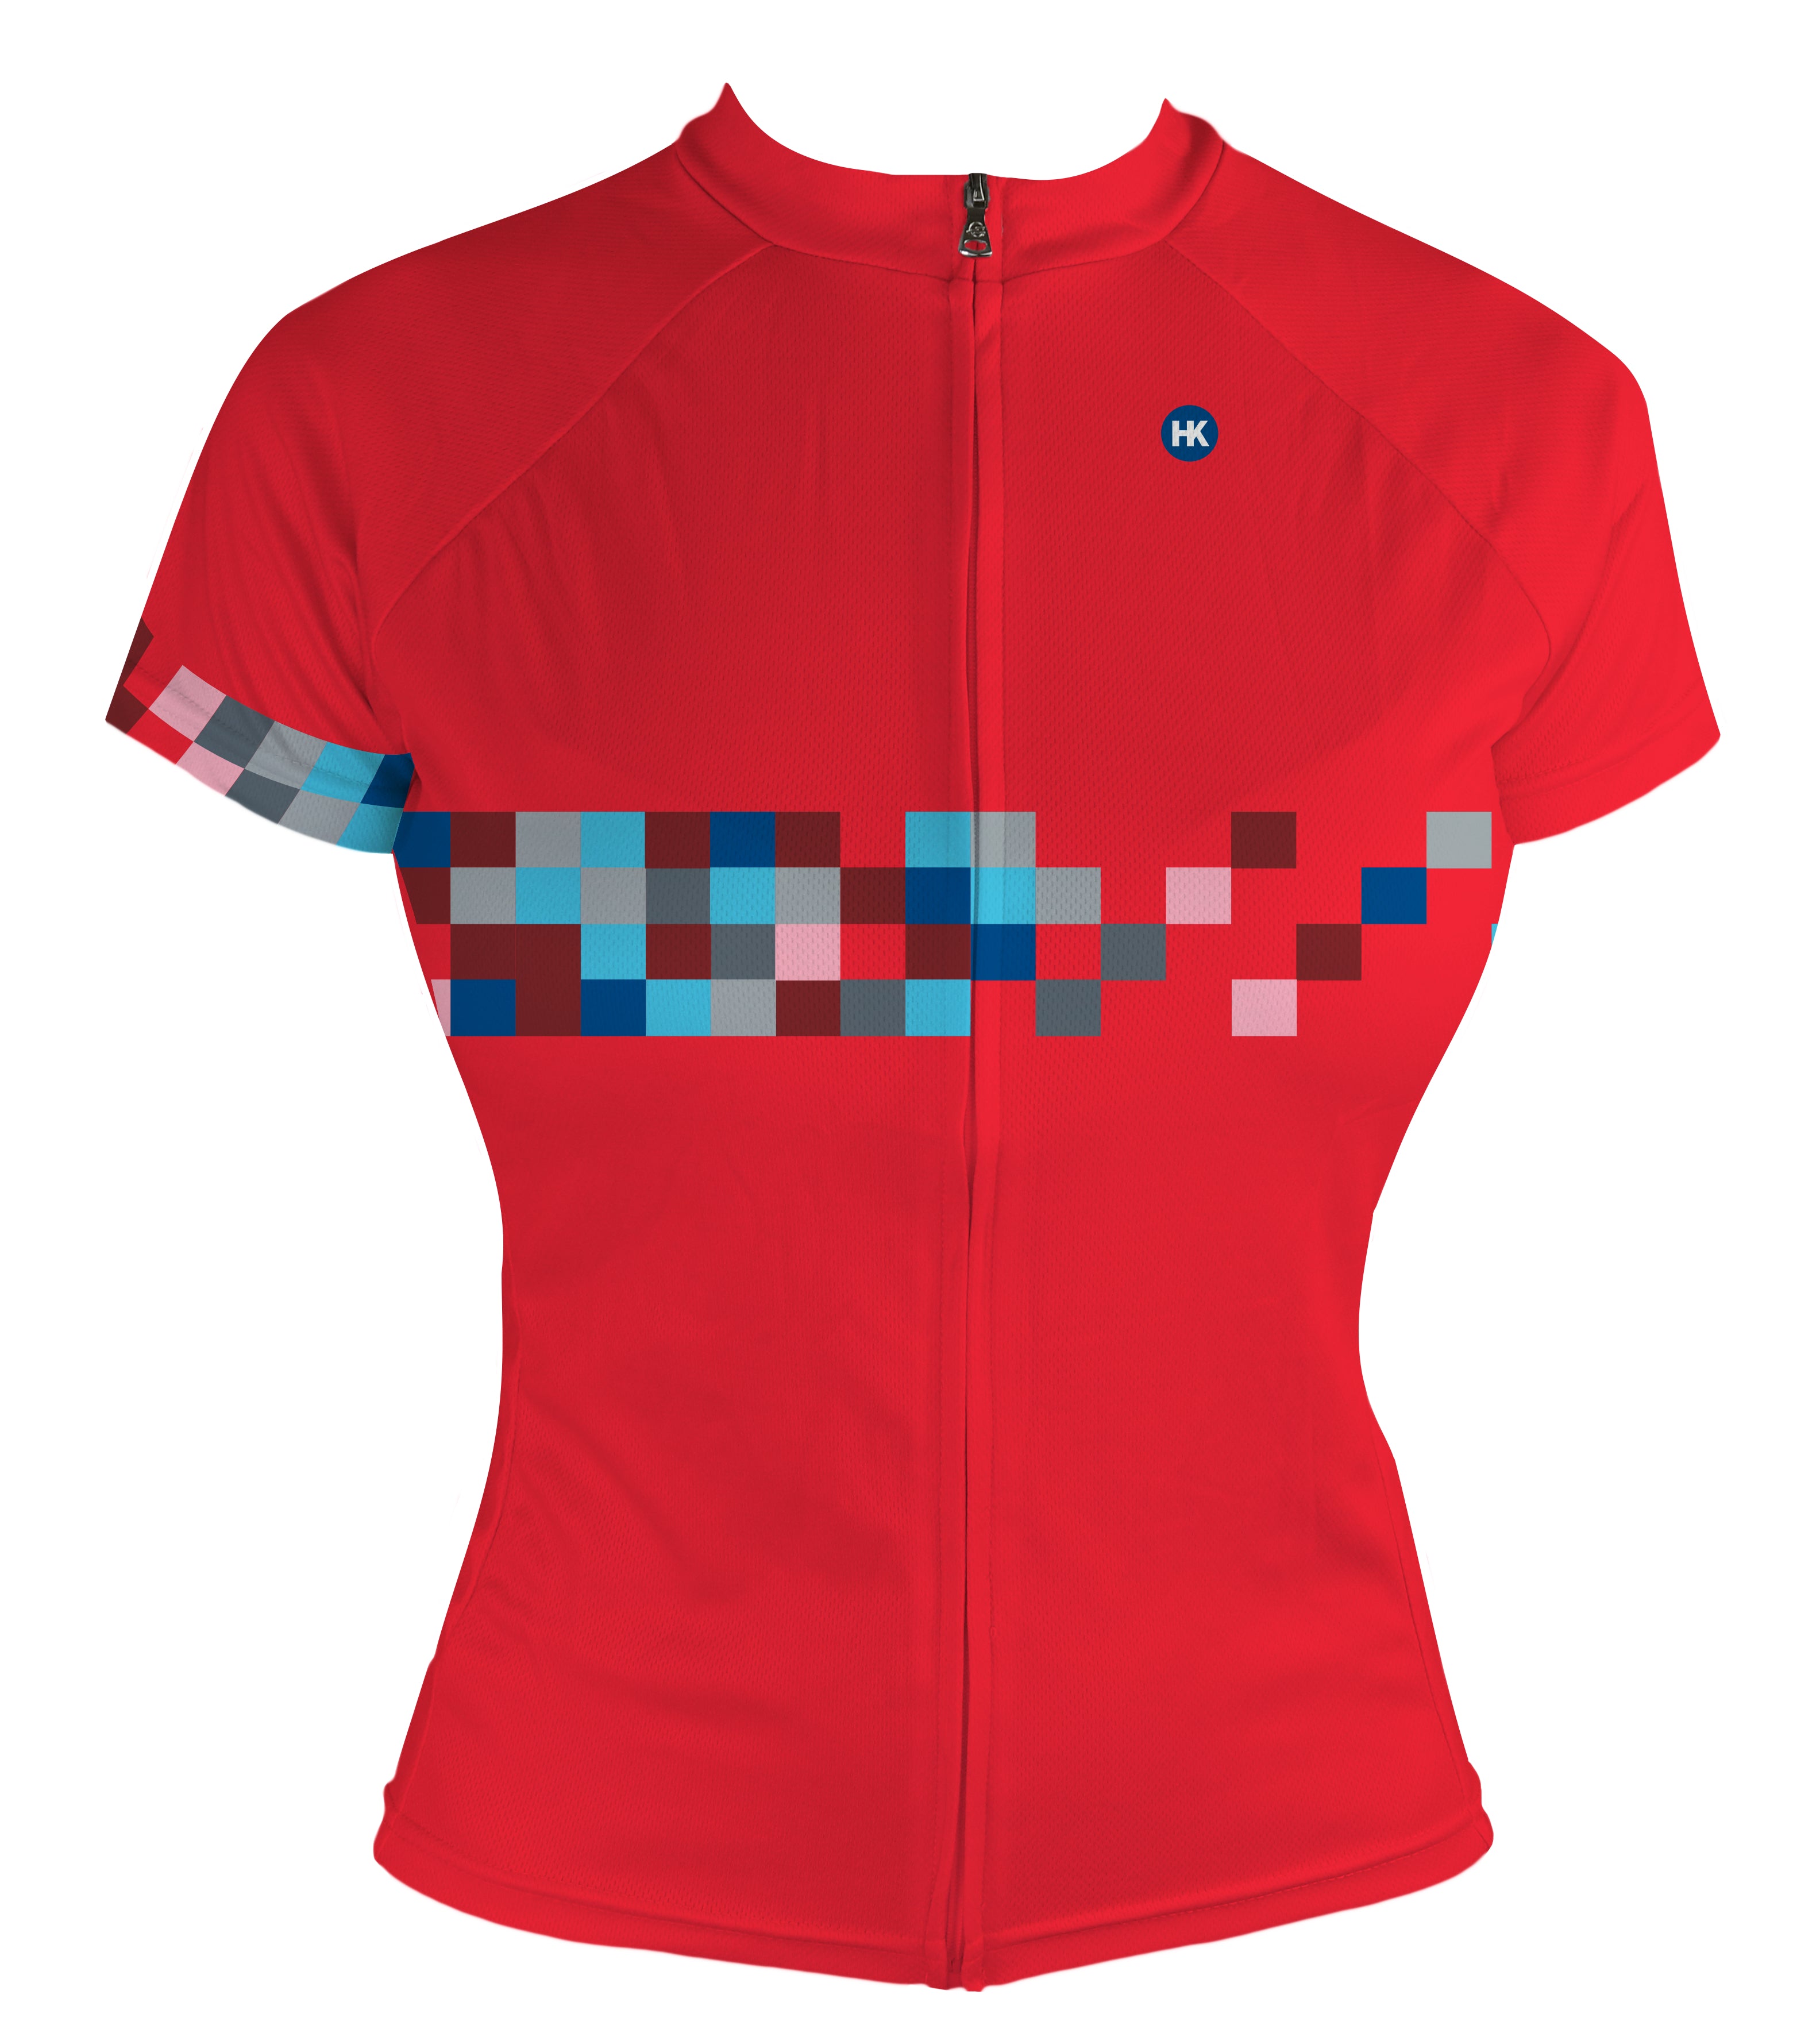 Color Coded Women's Summer Light Club-Cut Cycling Jersey by Hill Killer